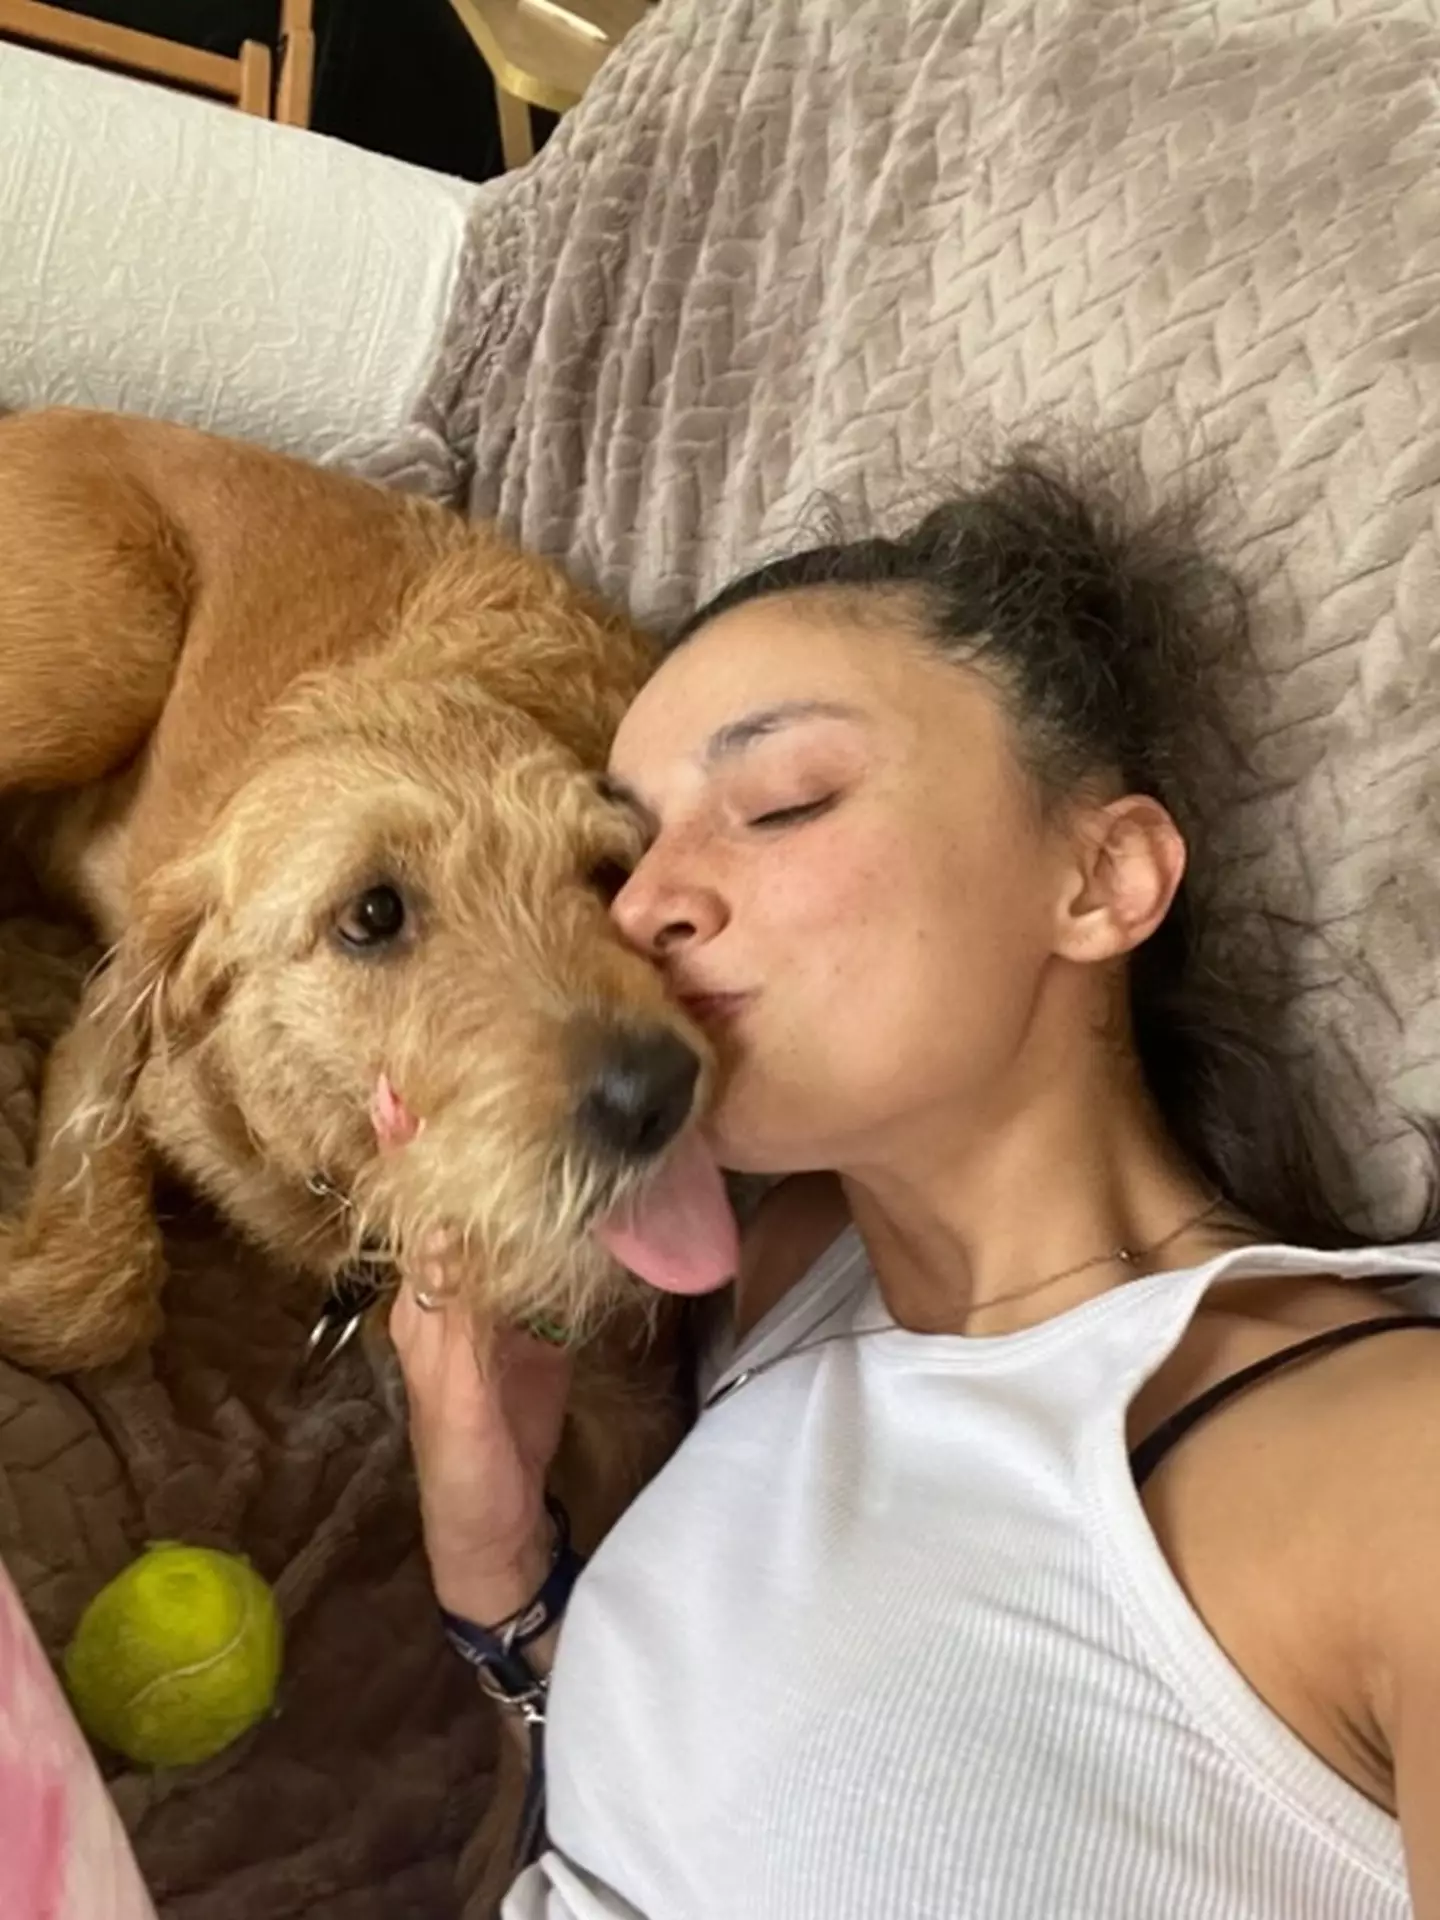 Yasmine struggled to walk her dog before she was diagnosed with Functional Neurological Disorder.